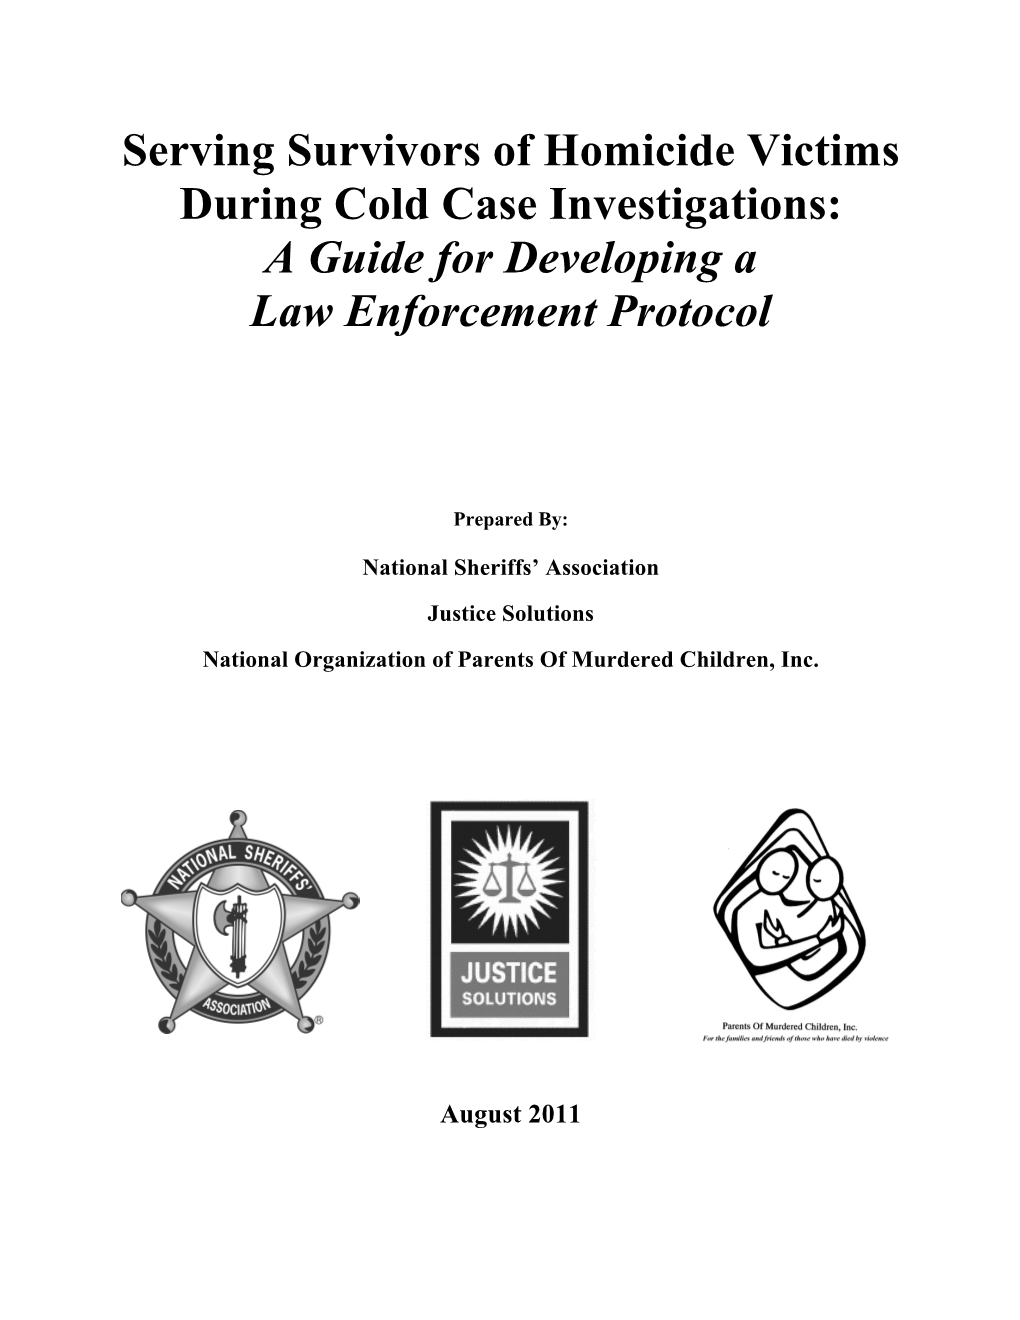 Serving Survivors of Homicide Victims During Cold Case Investigations: a Guide for Developing a Law Enforcement Protocol